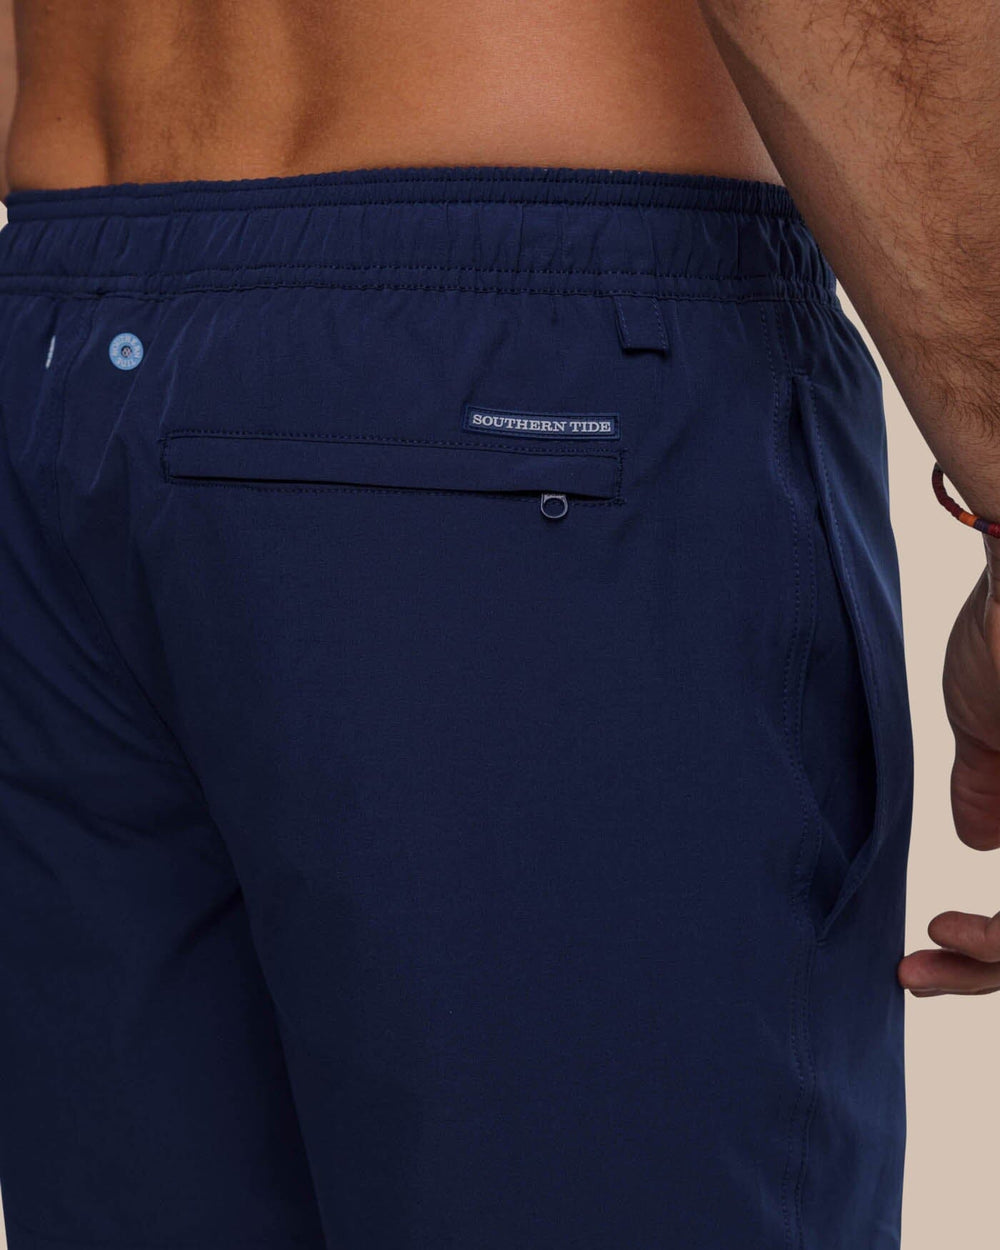 The detail view of the Southern Tide Solid Swim Trunk 3 by Southern Tide - True Navy